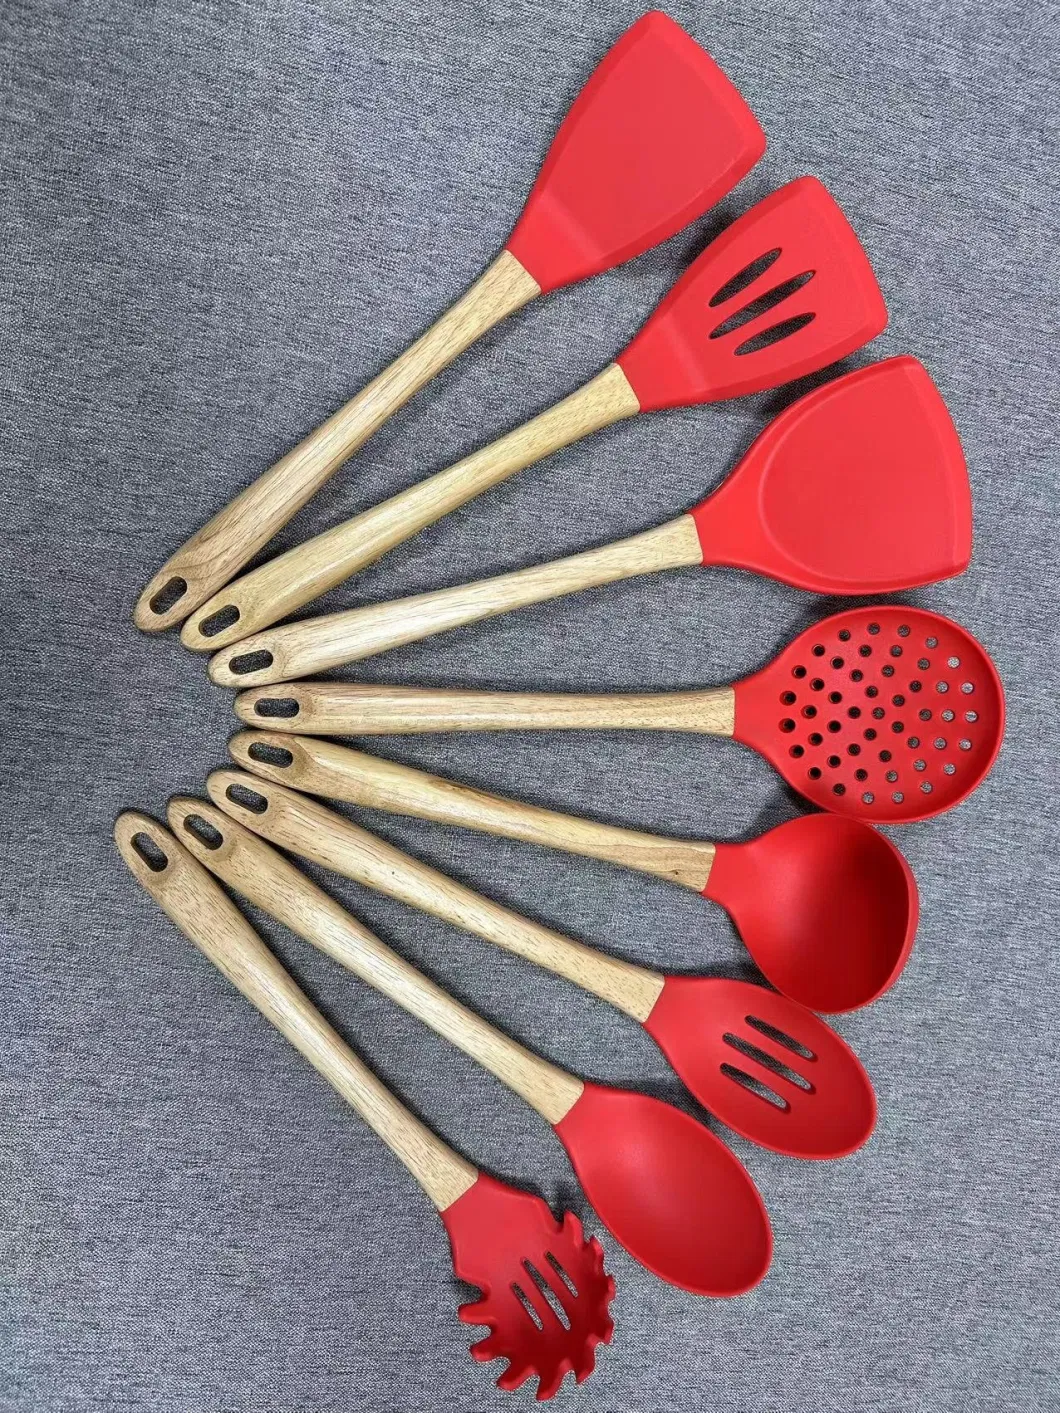 Non-Stick BPA-Free Wooden Handle Silicone Cooking Cookware Utensils Accessories Set